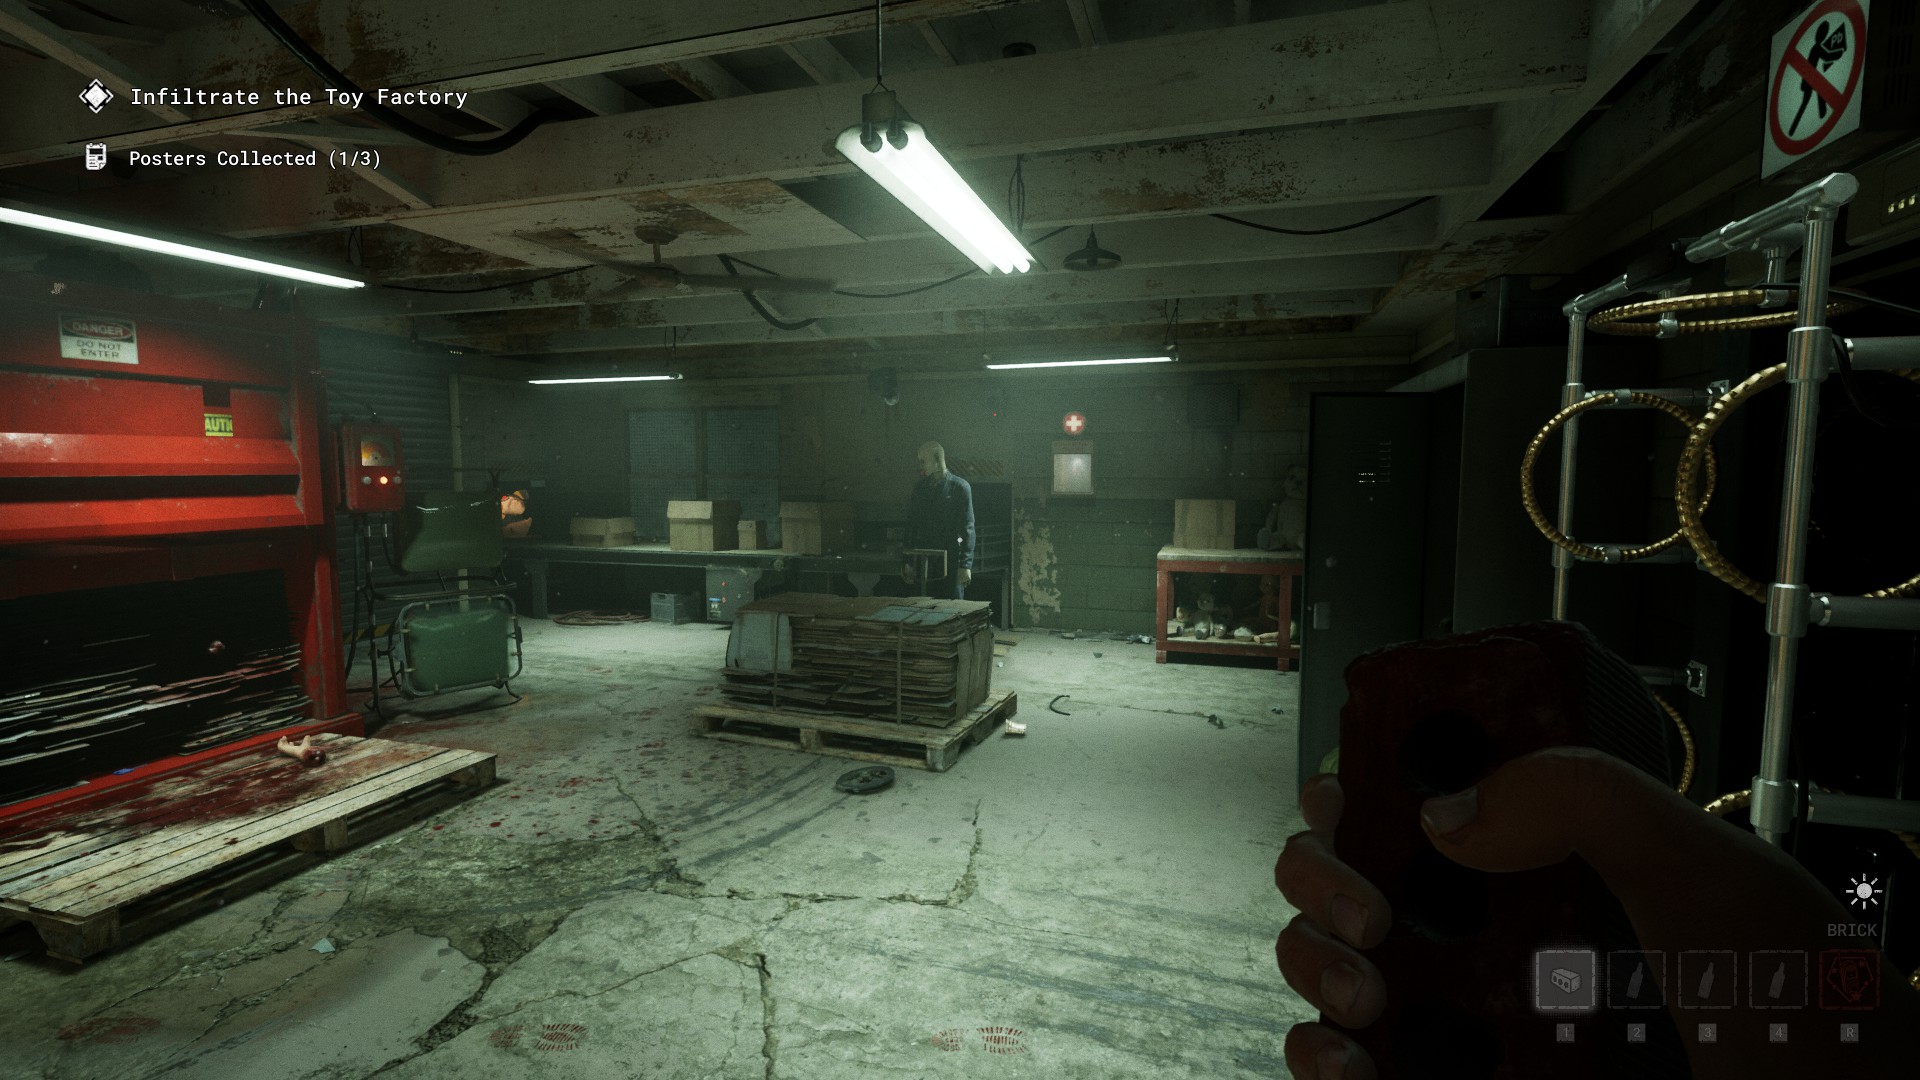 All Toy Factory Syringe in The Outlast Trials